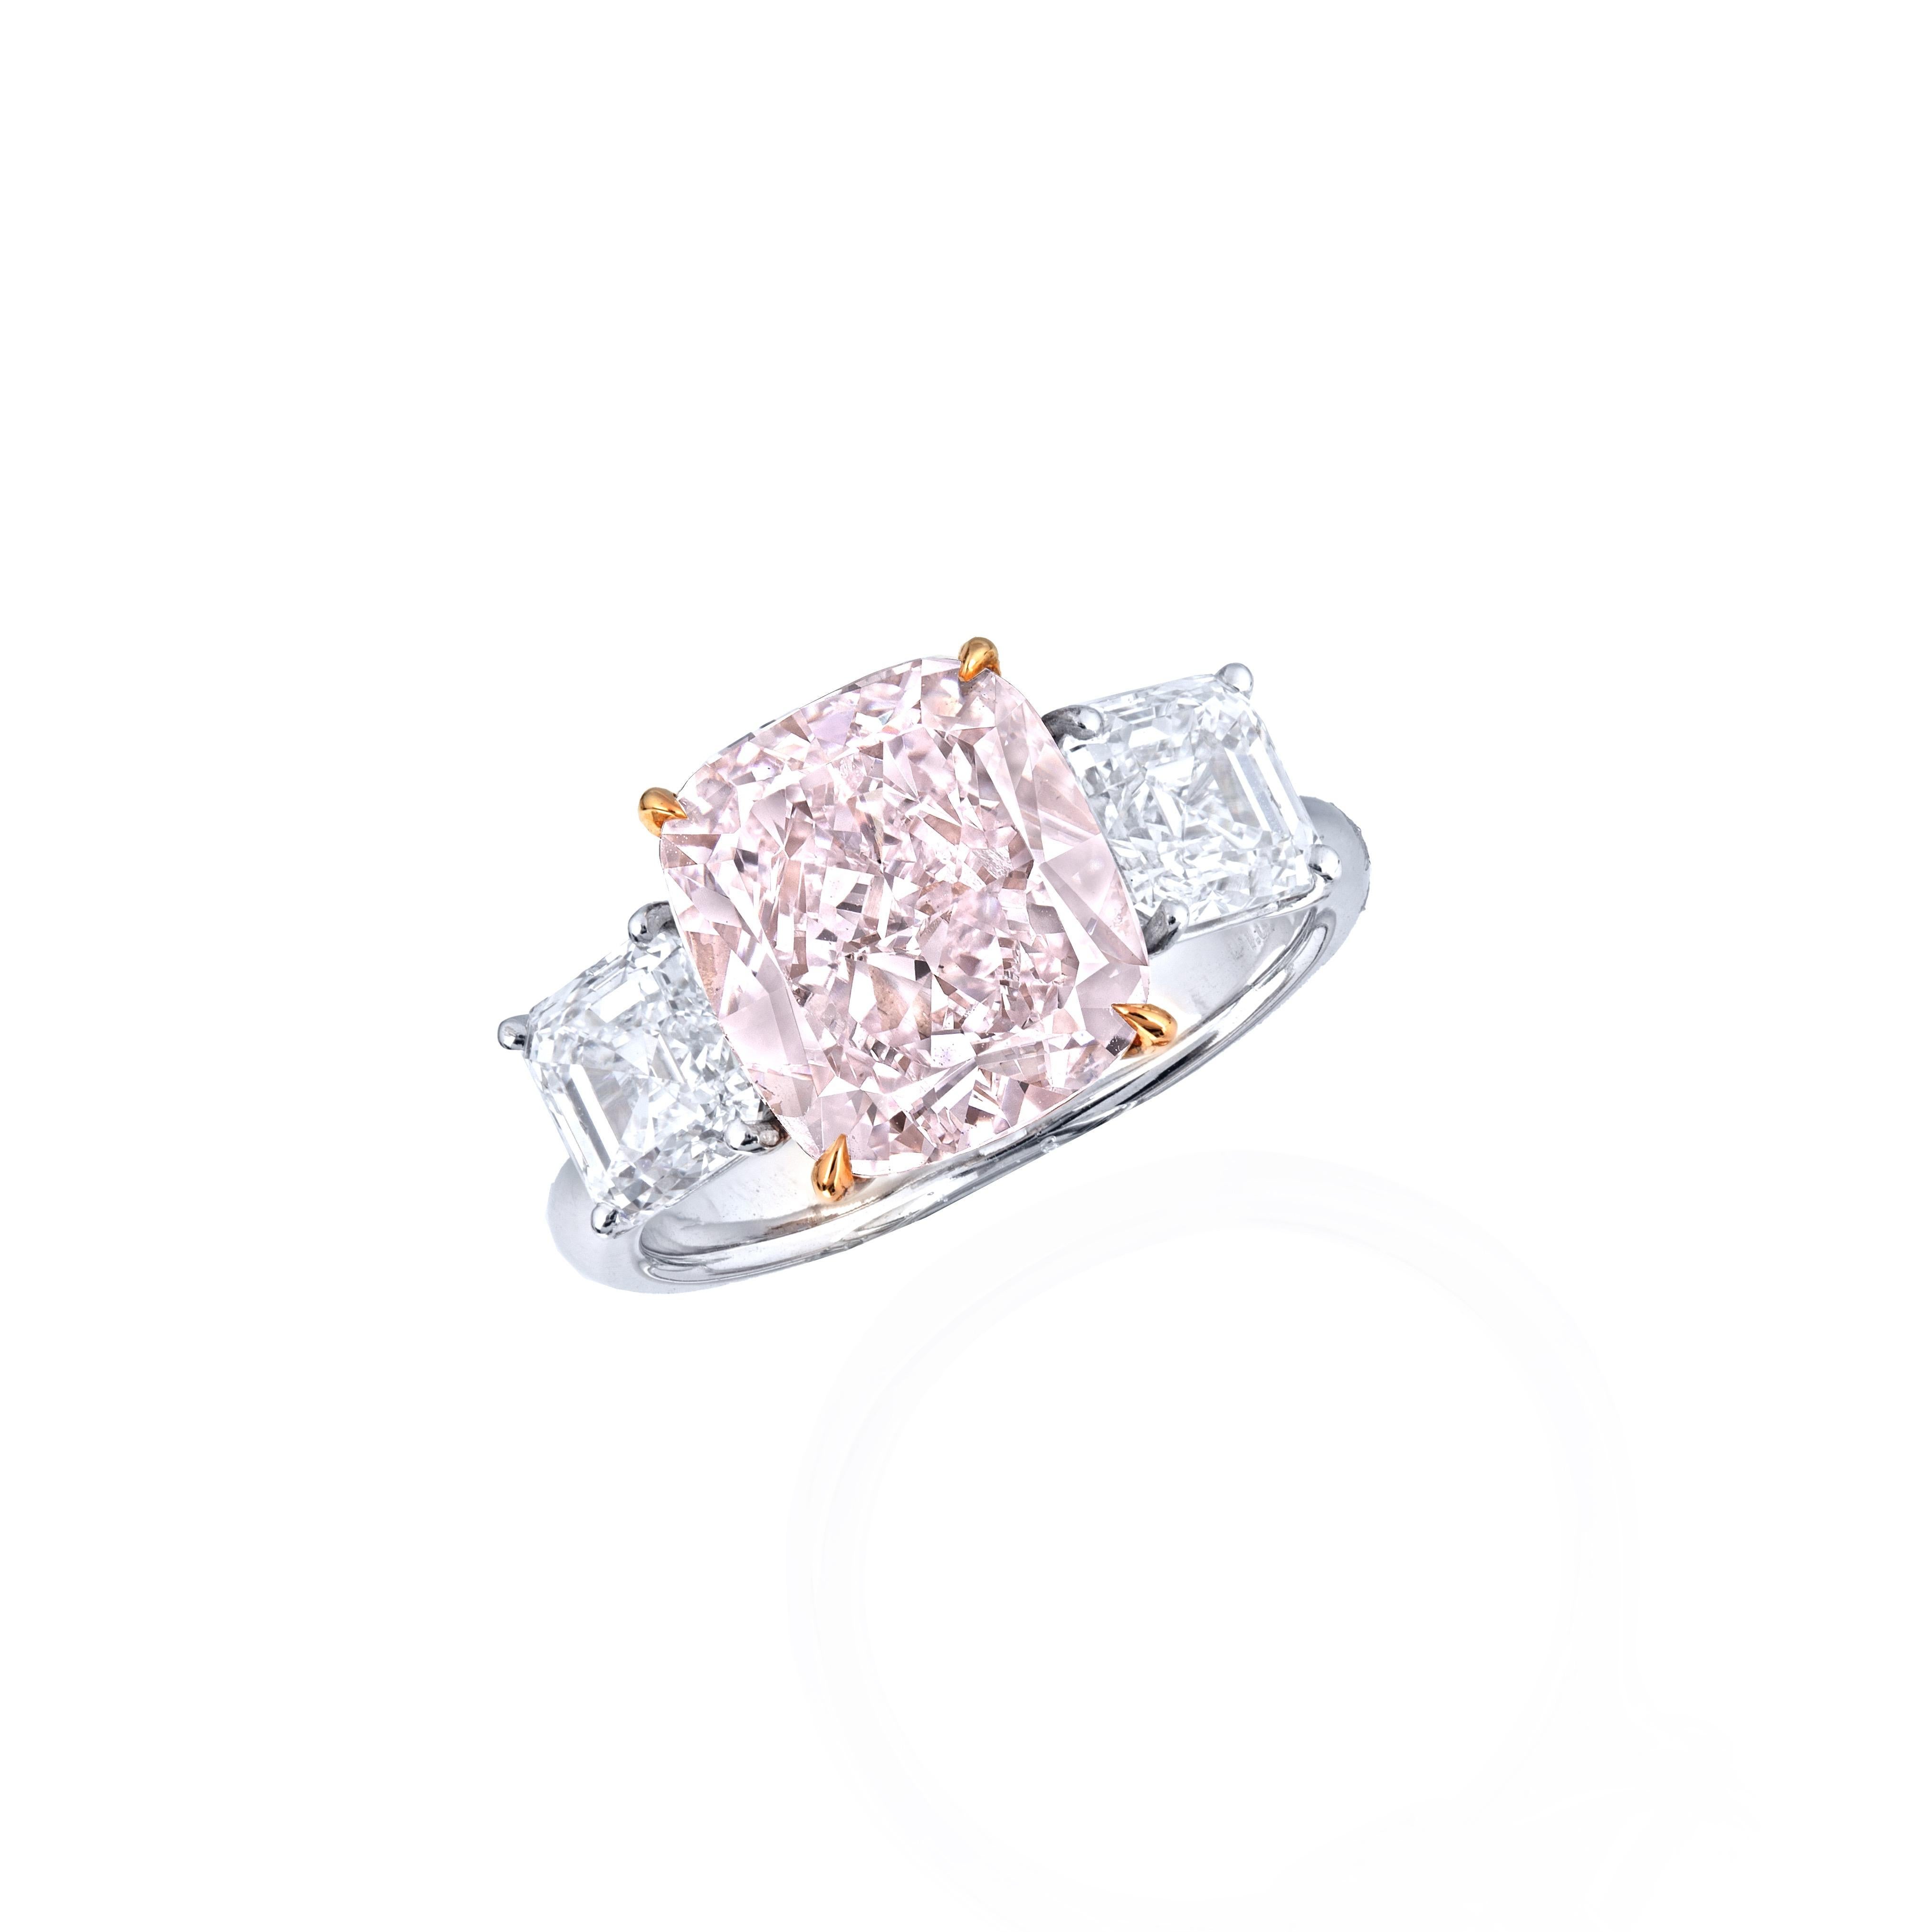 Cushion Cut Emilio Jewelry Gia Certified 7.50 Carat Natural Pink Diamond Ring For Sale